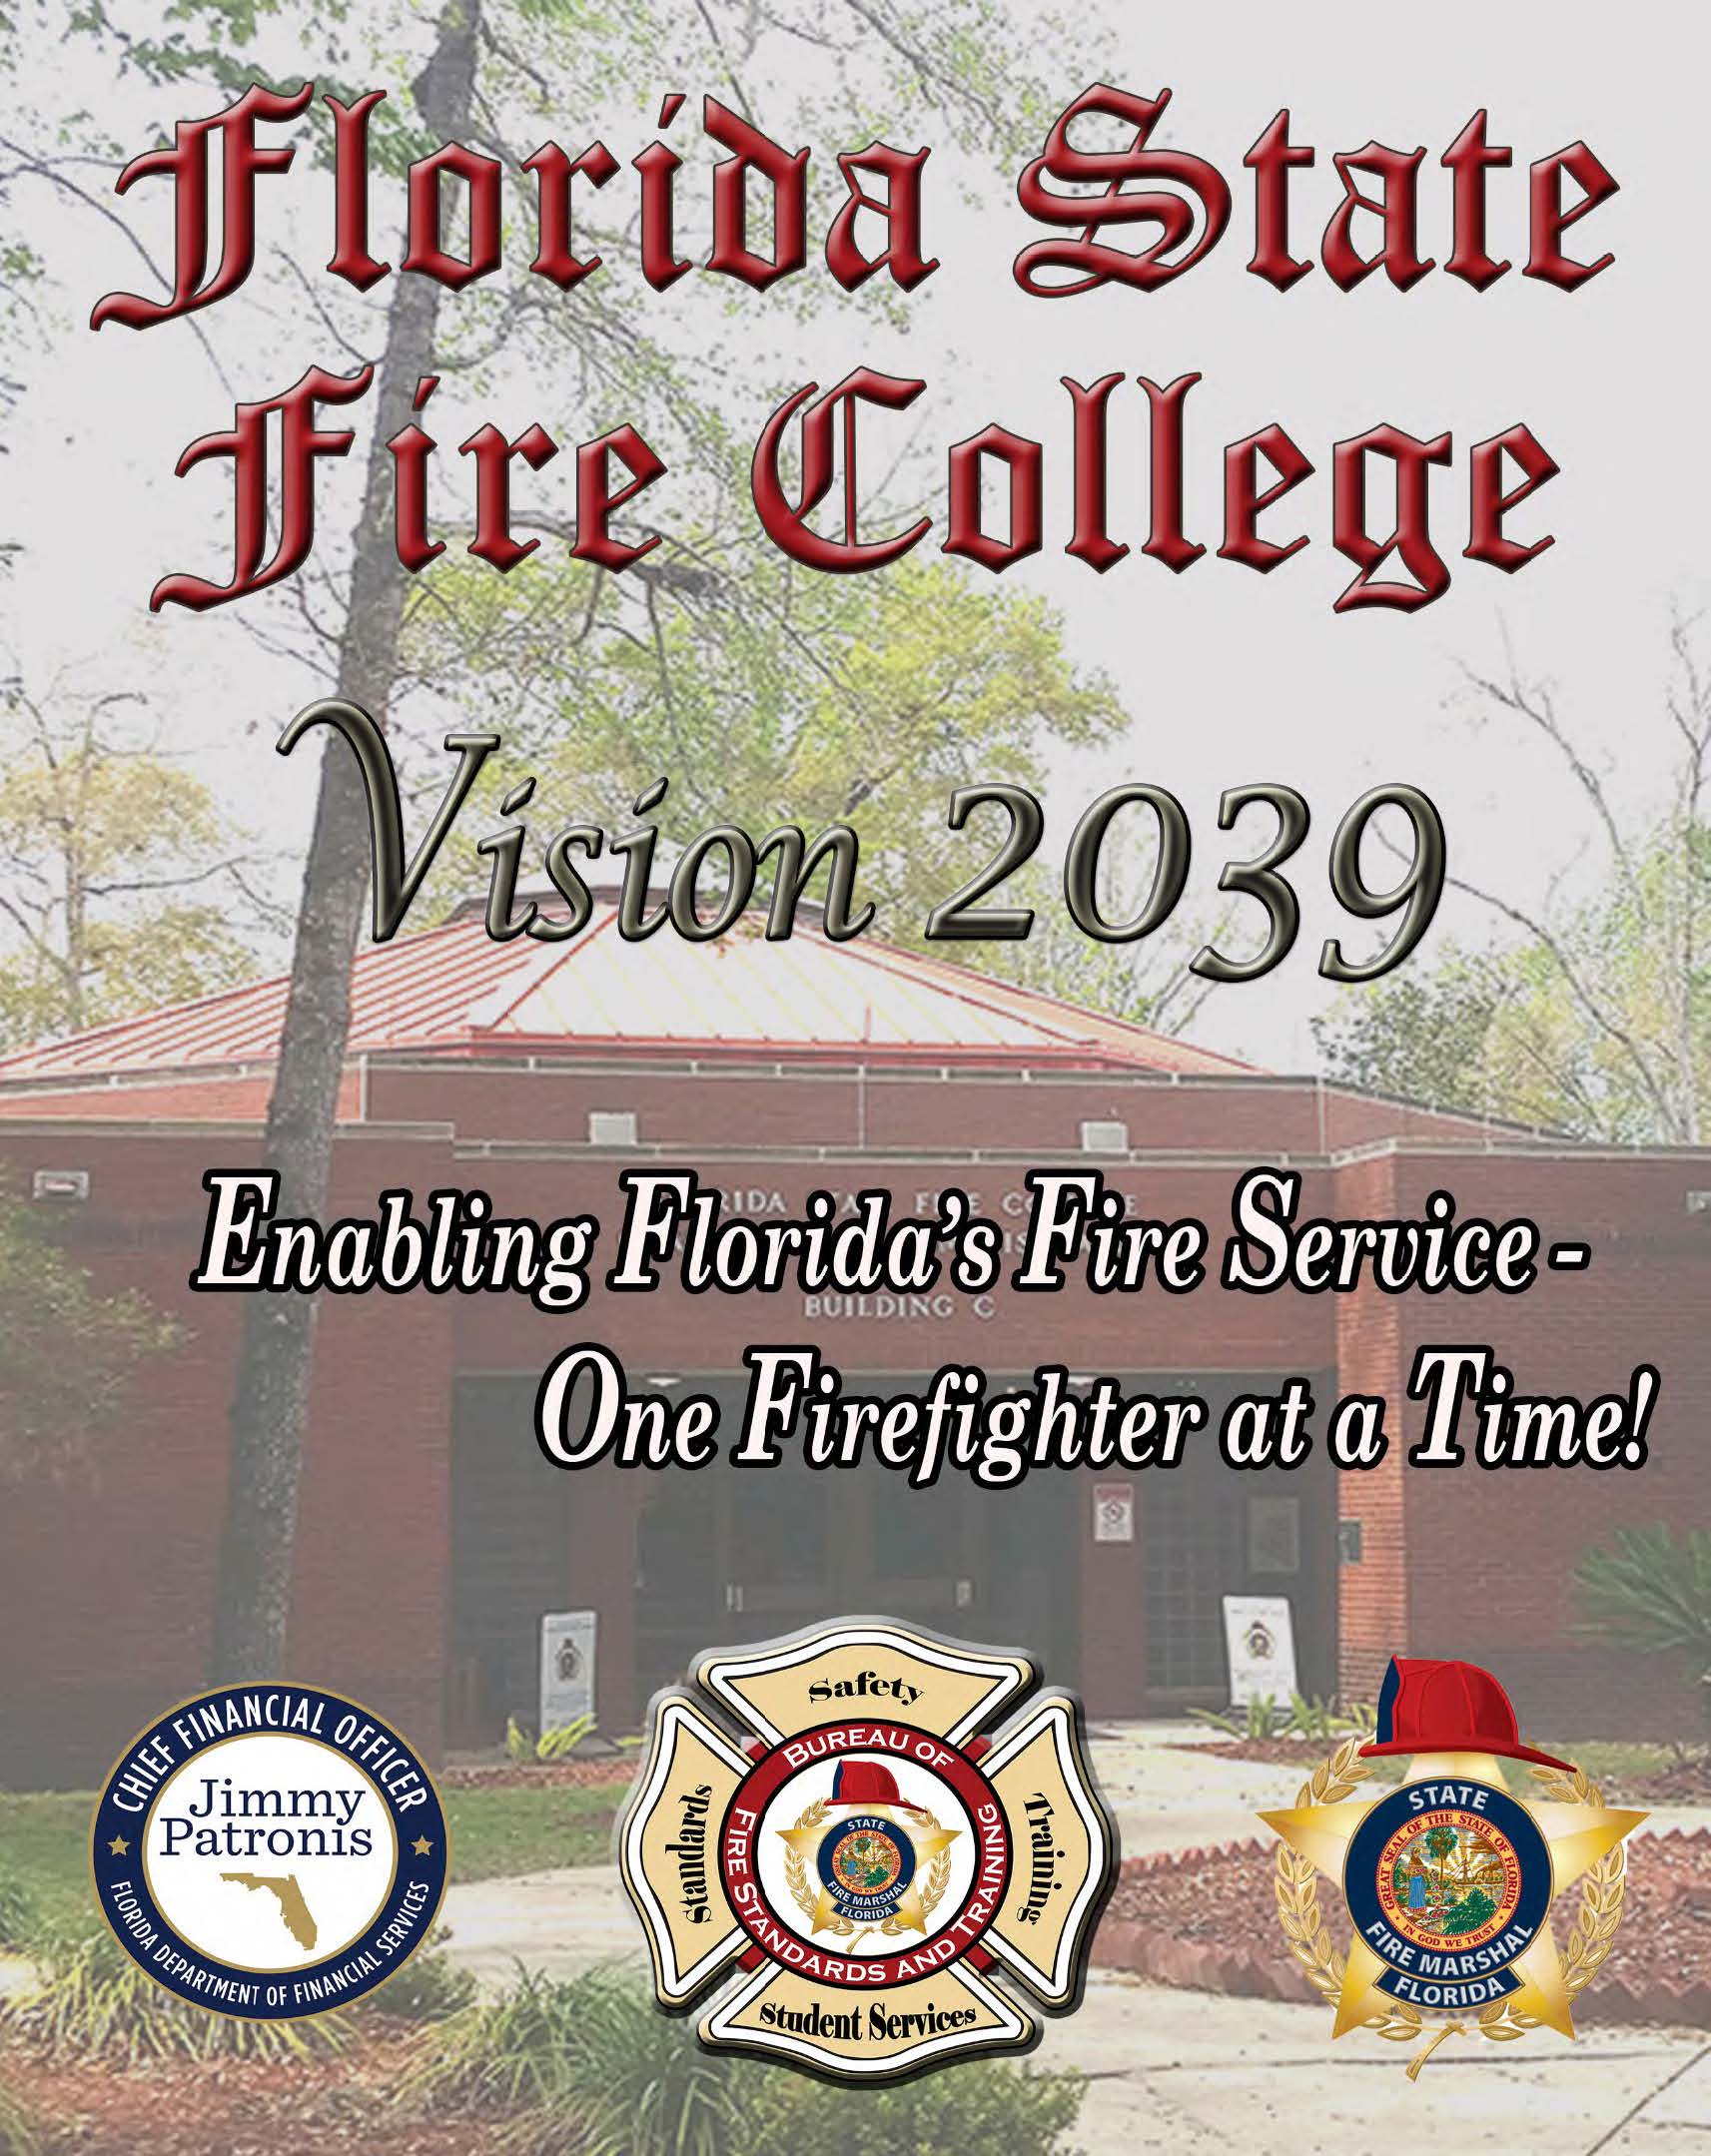 Florida State Fire College Vision 2039 Flyer